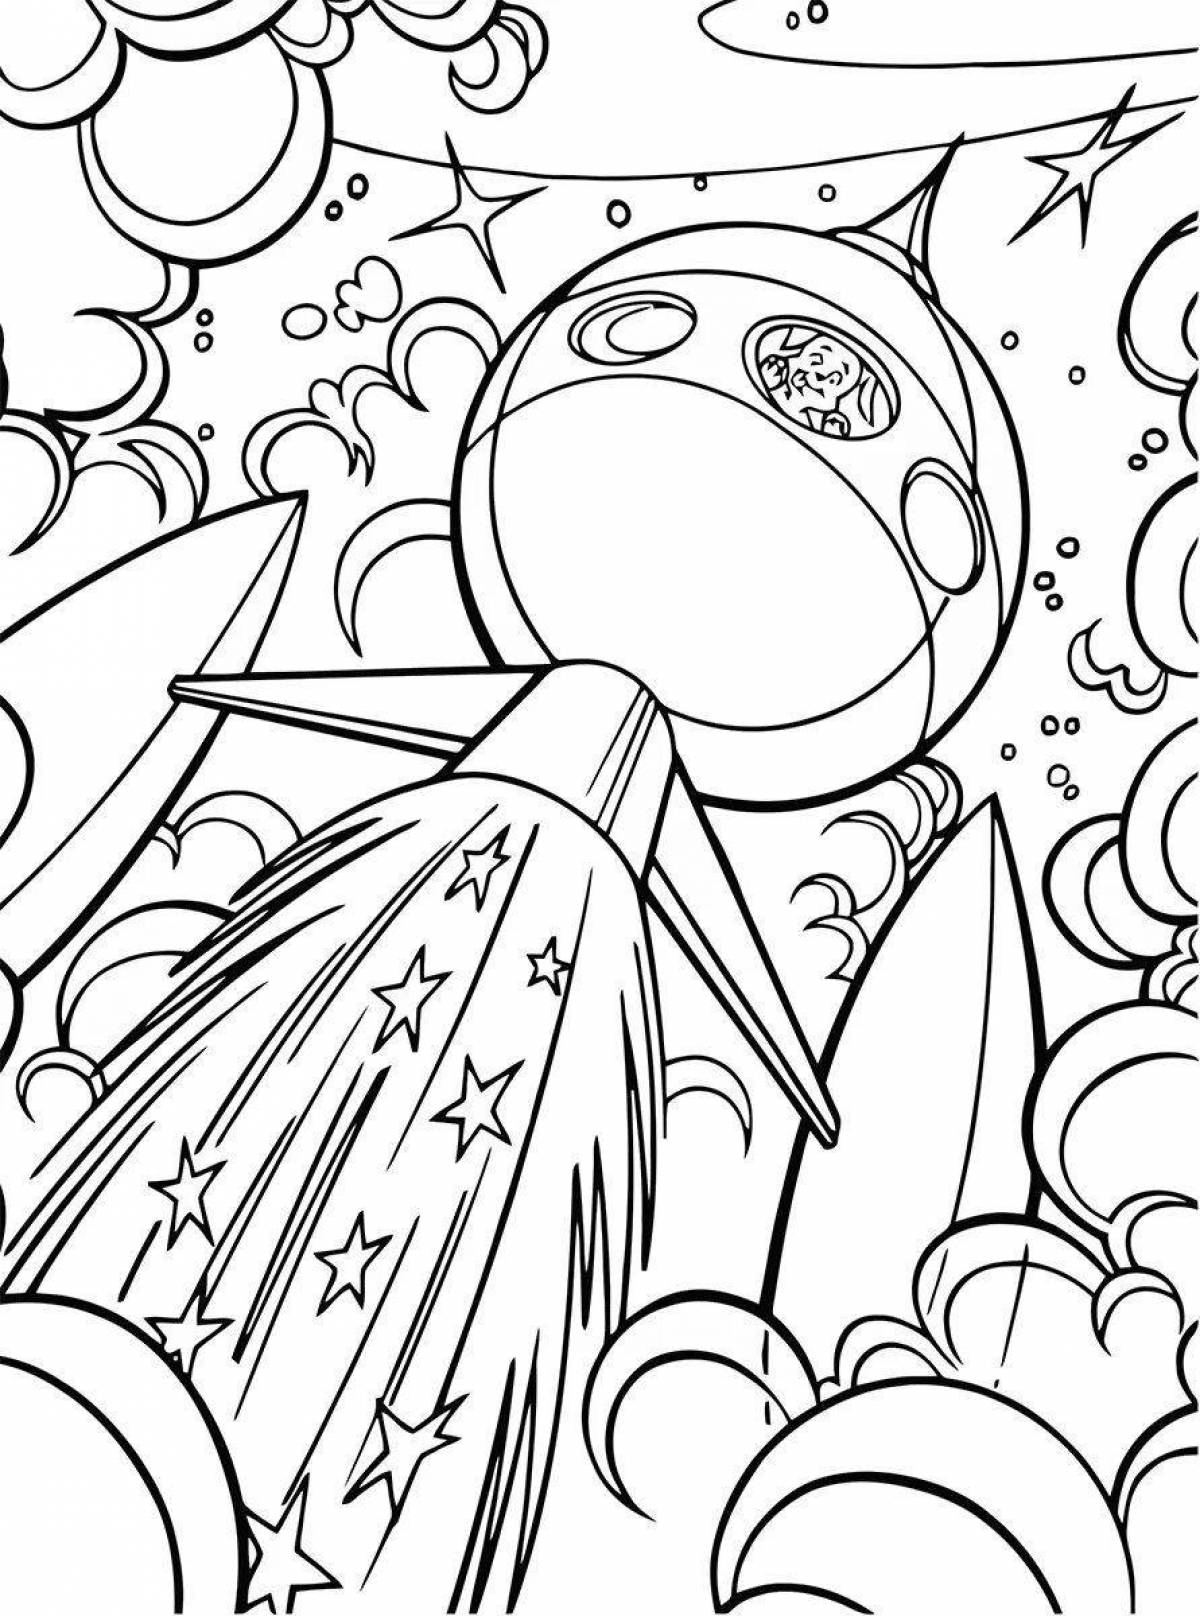 Majestic space coloring book